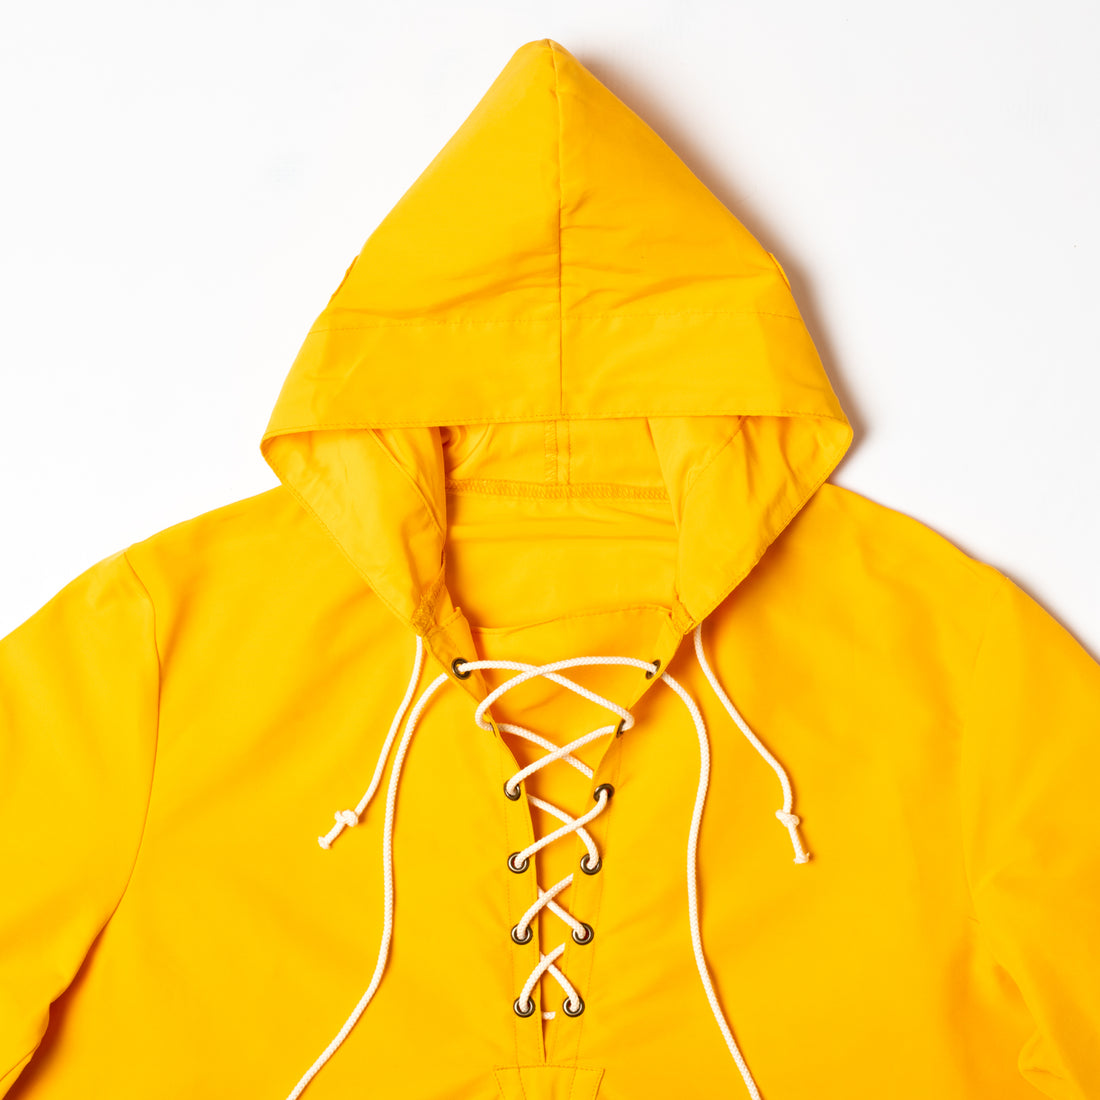 Bryceland's Foul Weather Smock Yellow